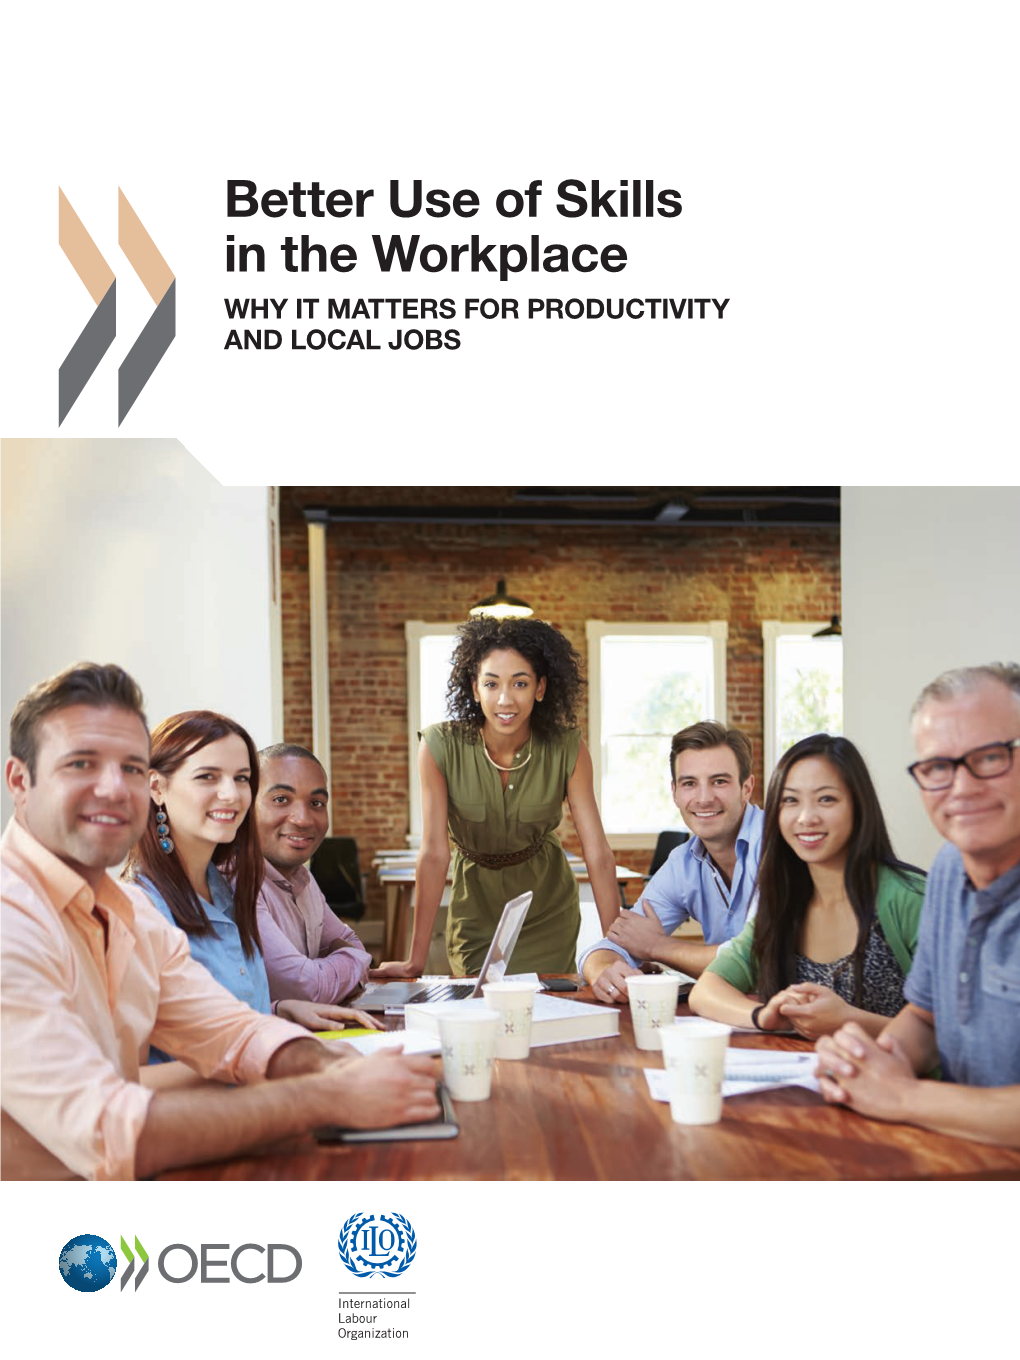 Better Use of Skills in the Workplace